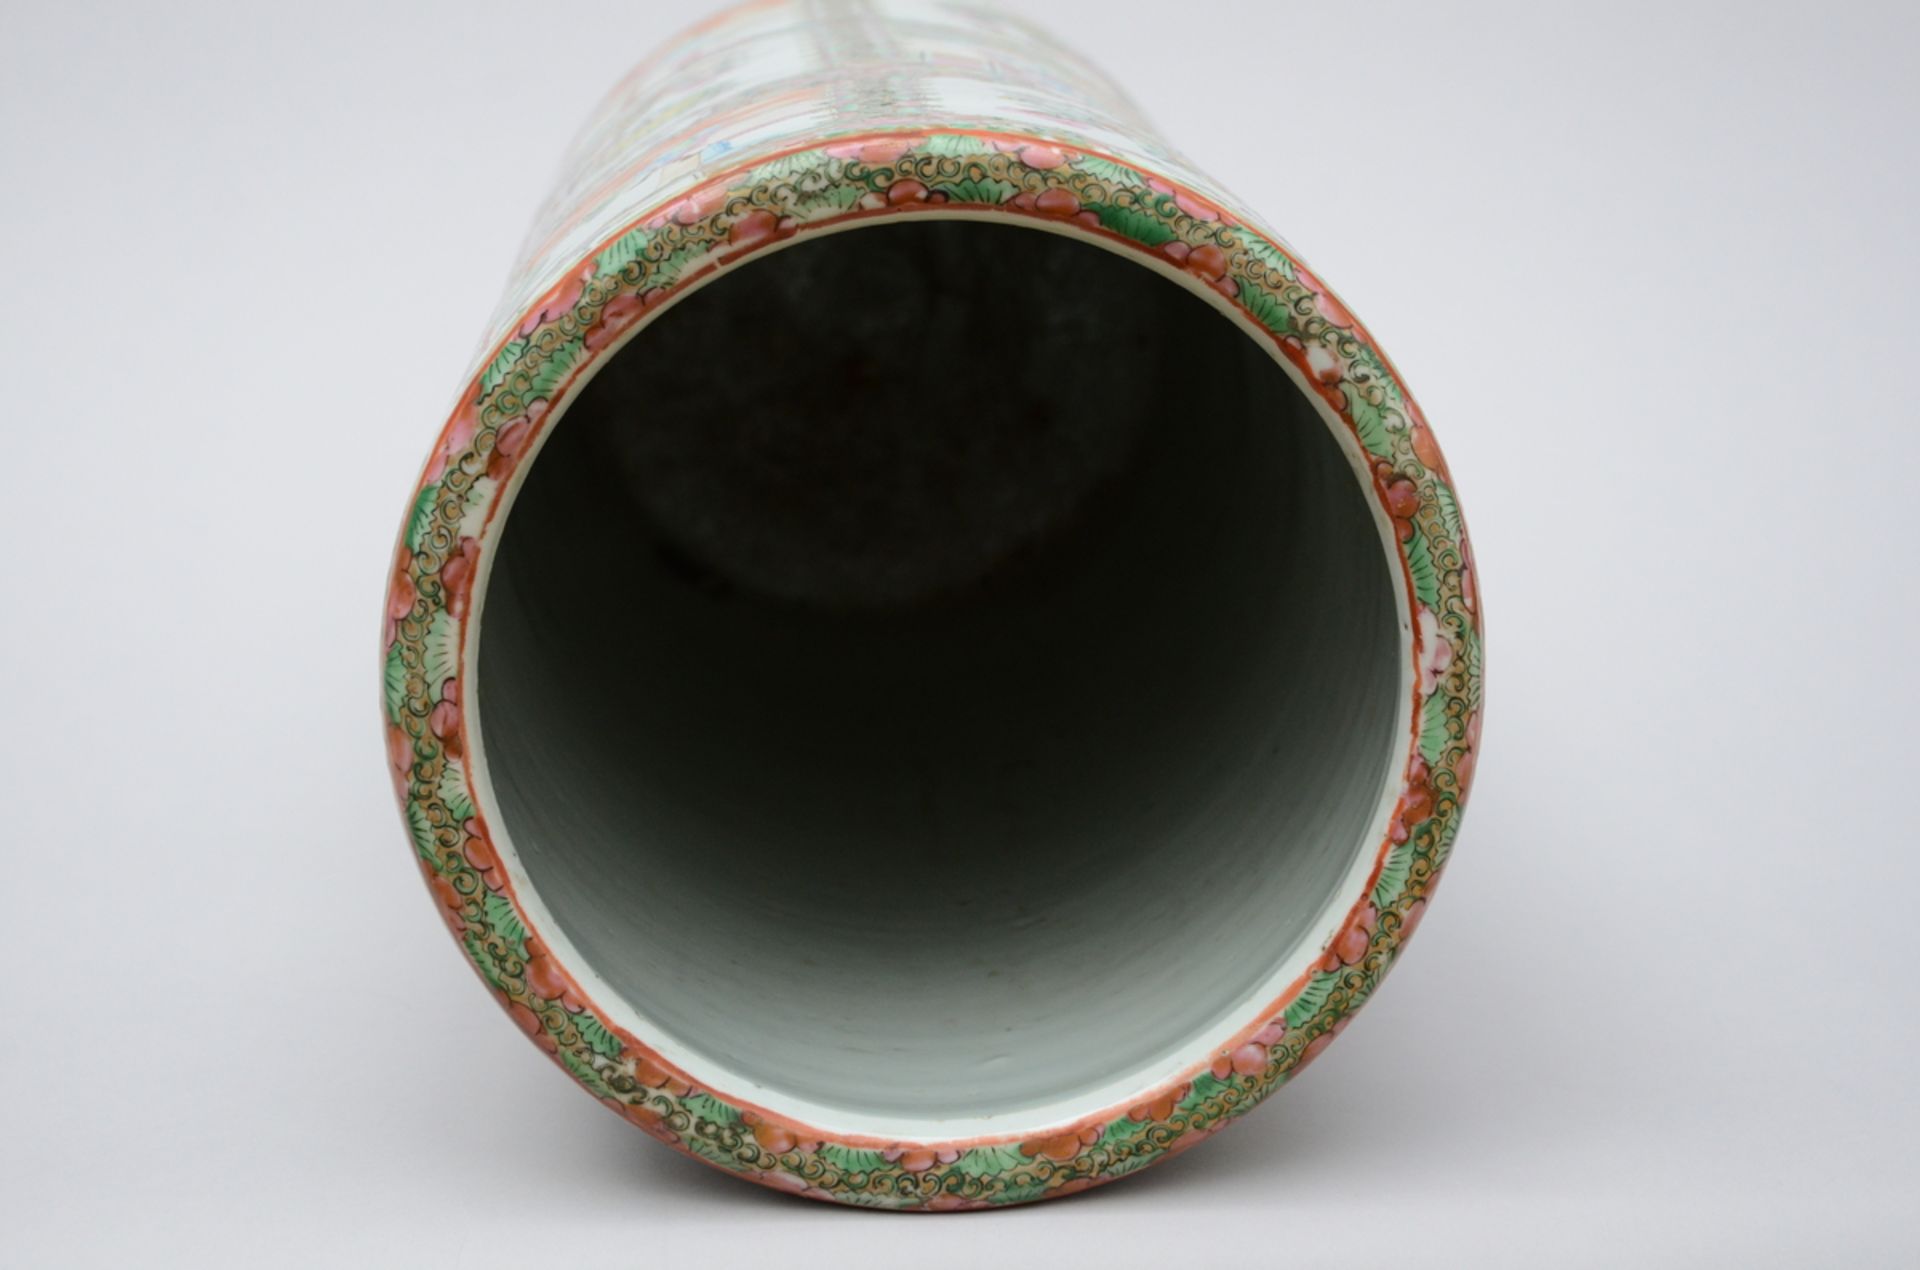 Umbrella stand in Canton porcelain (H61cm) (*) - Image 3 of 4